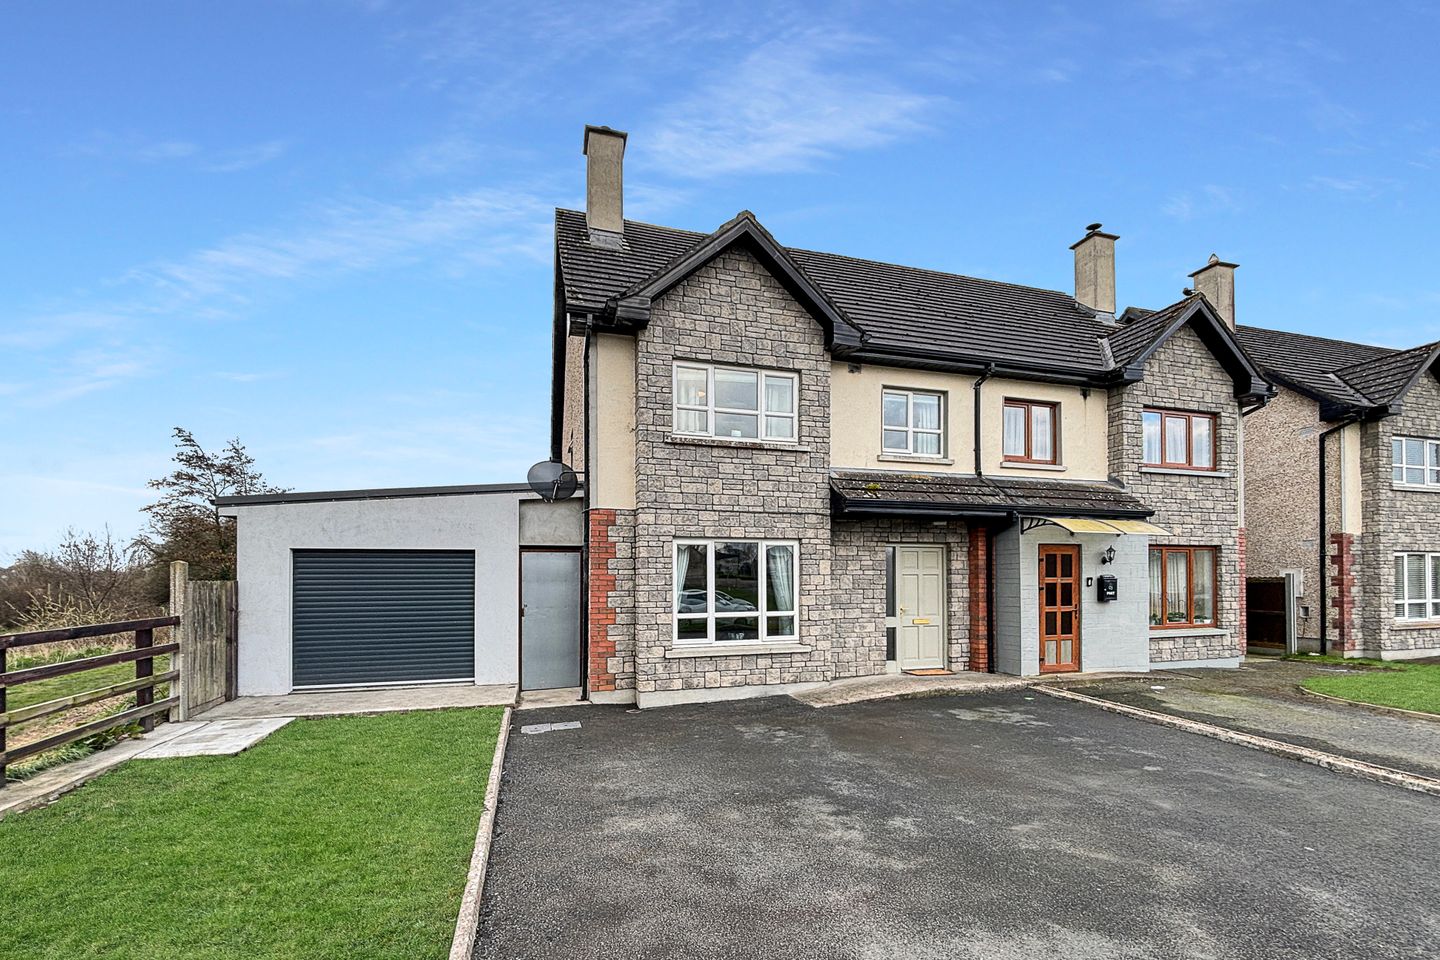 26 The Haven, Millersbrook, Nenagh, Co. Tipperary, E45HH32